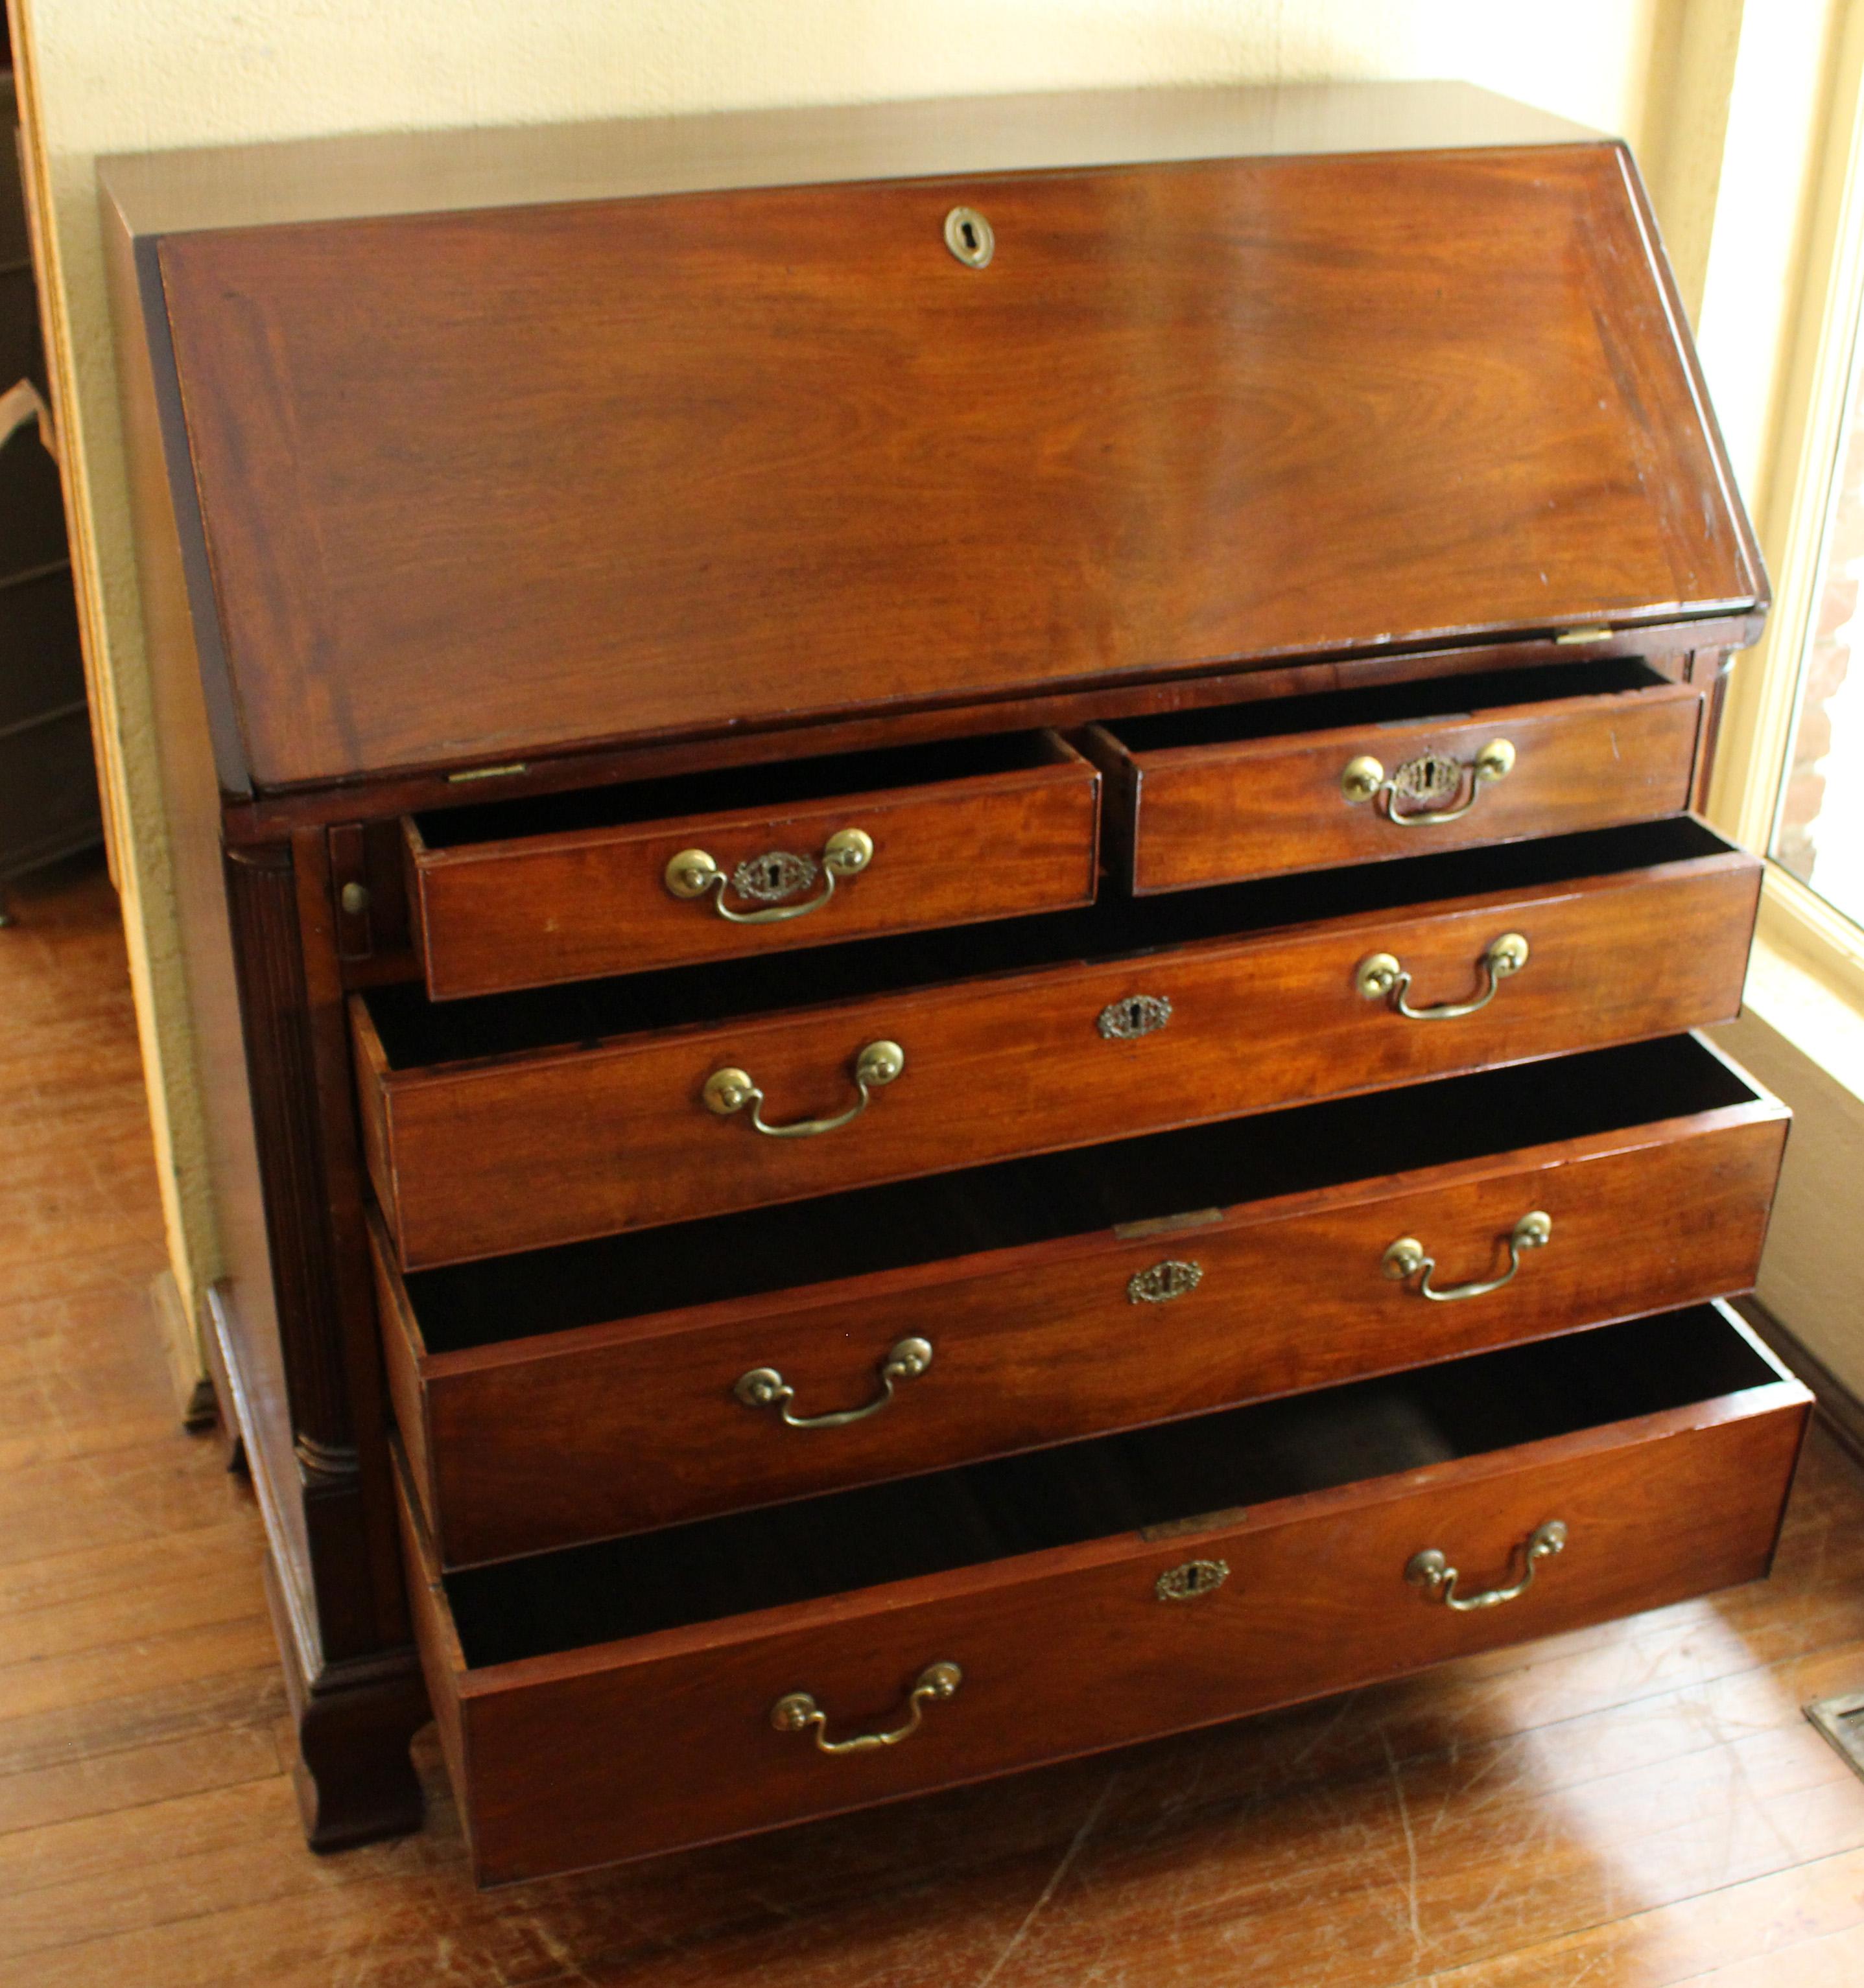 A superb quality George III slant front bureau of rich mahogany timbers with mahogany veneers. Circa 1765-80. Exceptional interior in Chippendale Gothic taste, with shaped, stepped drawers and pigeon holes with paper drawers in valences. Raised on